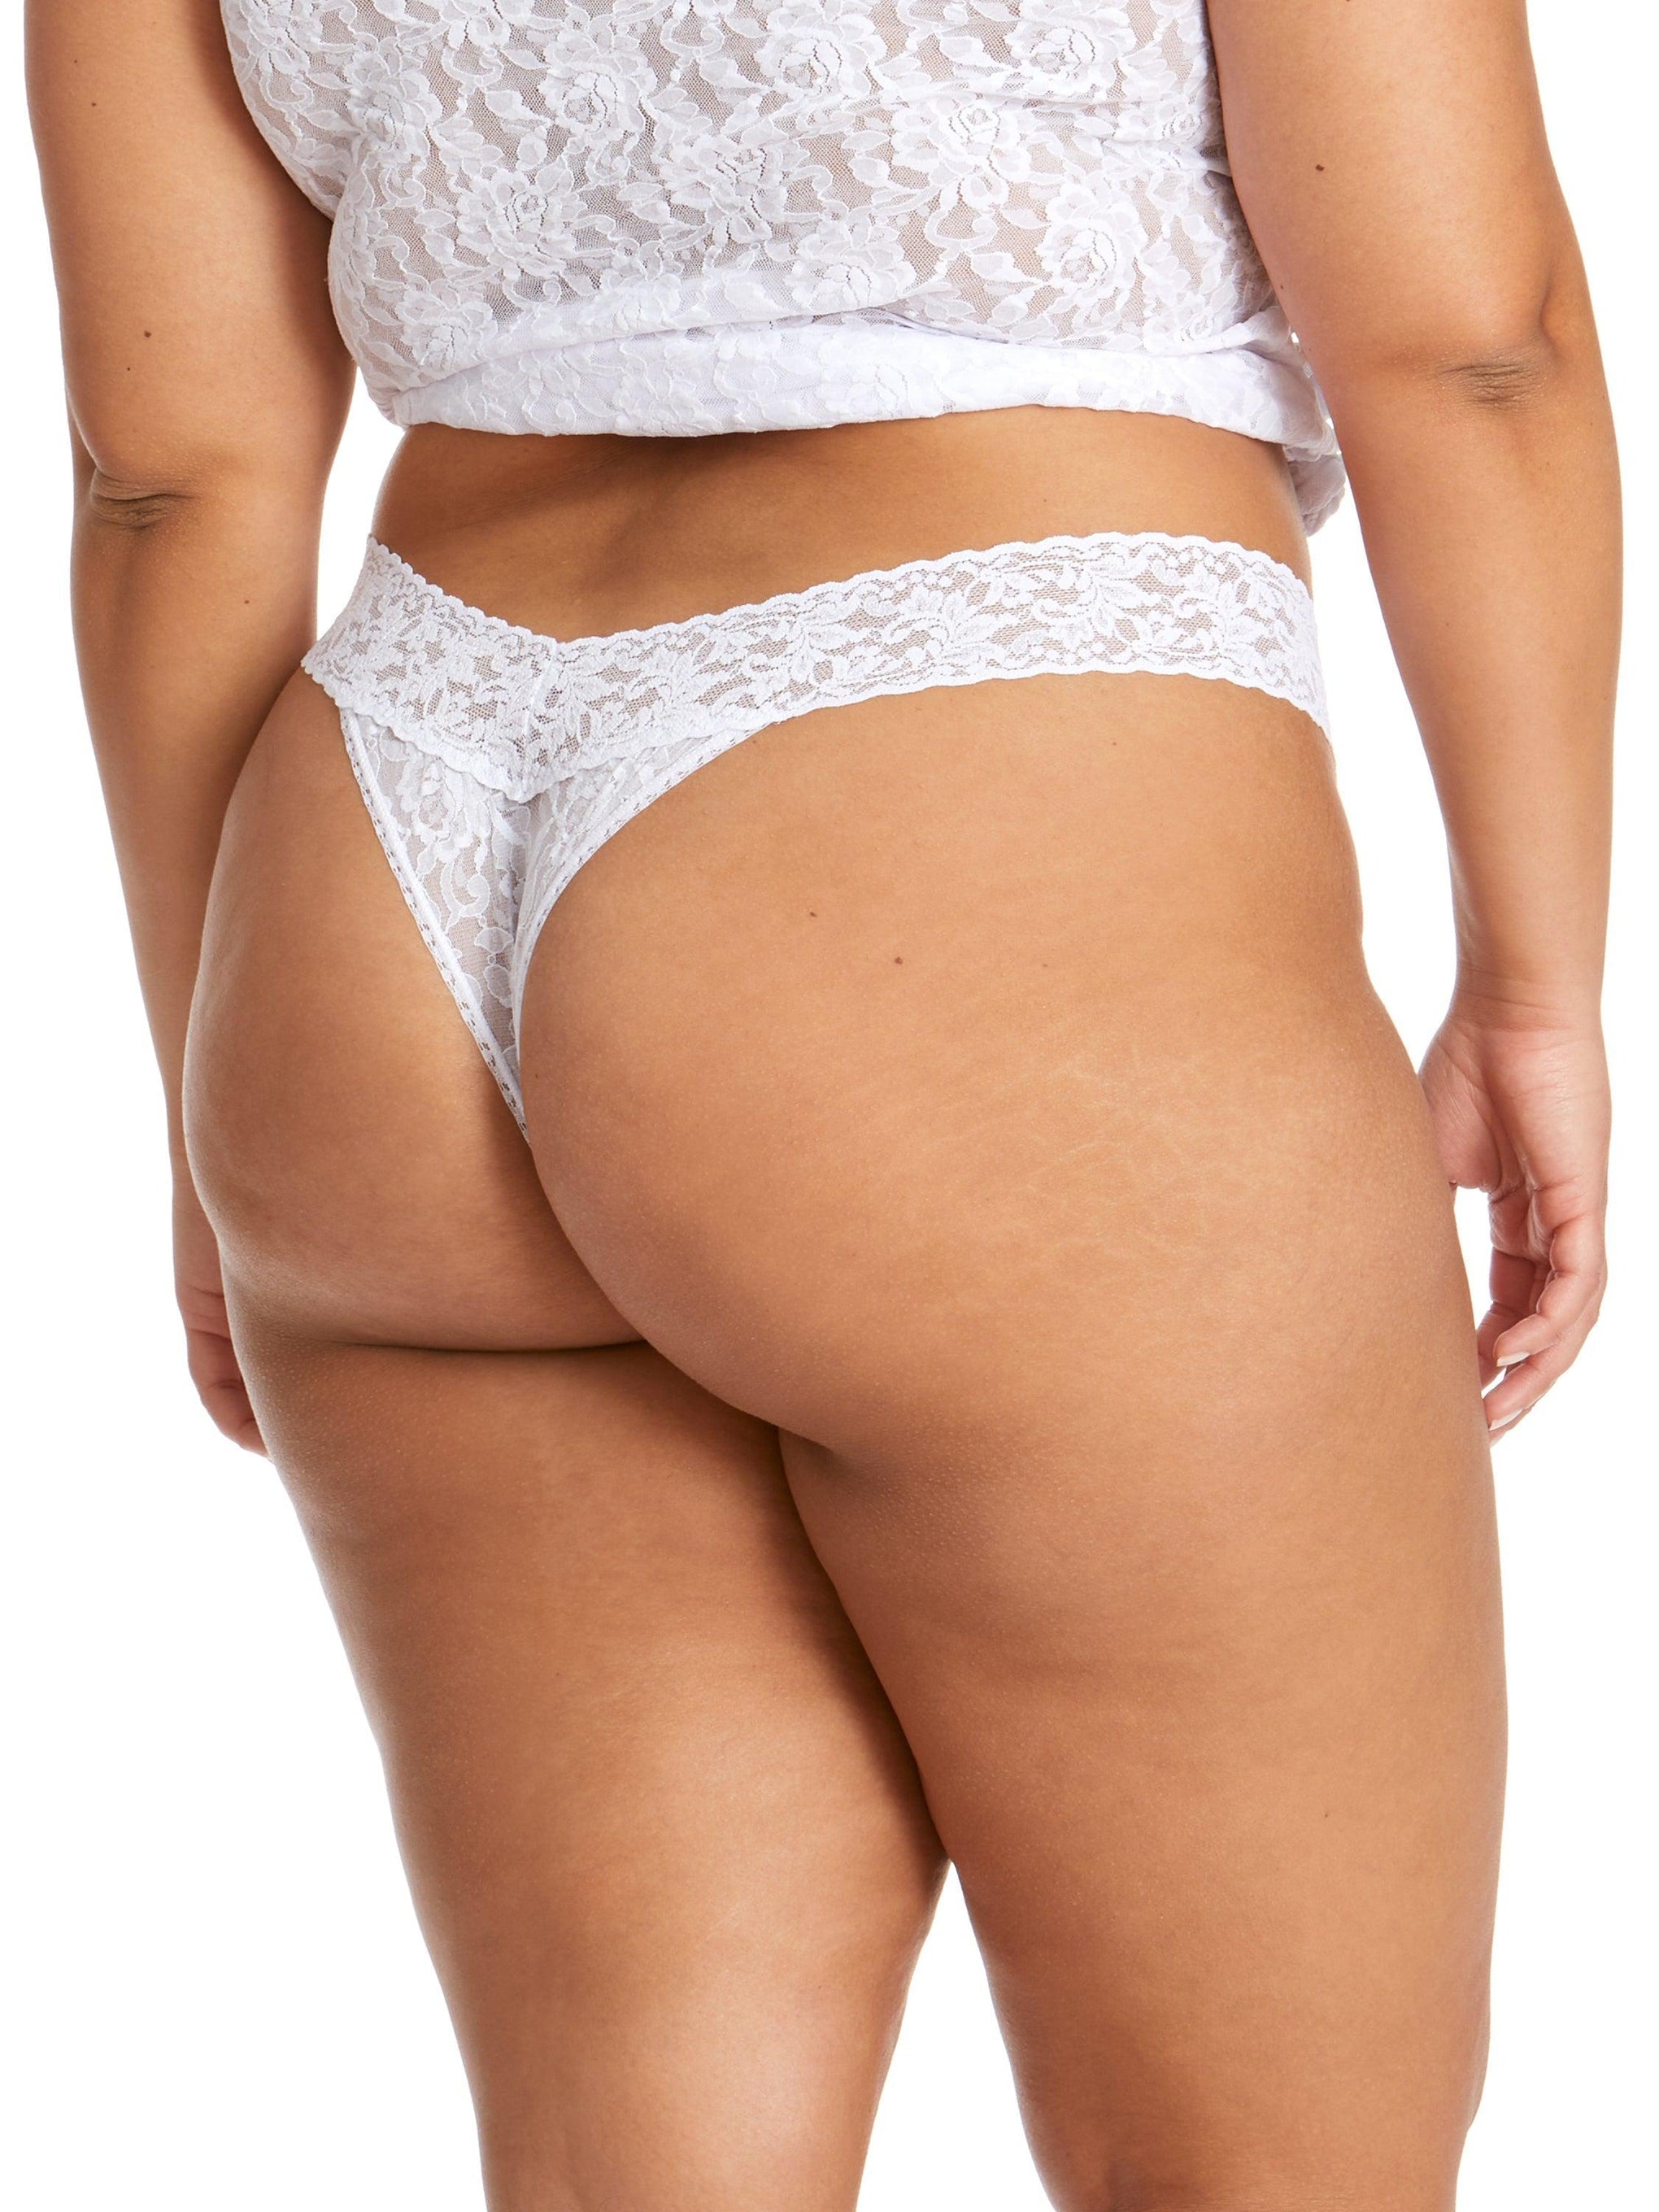 Crotchless Panties Lace Panties White Lace G-string Plus Size